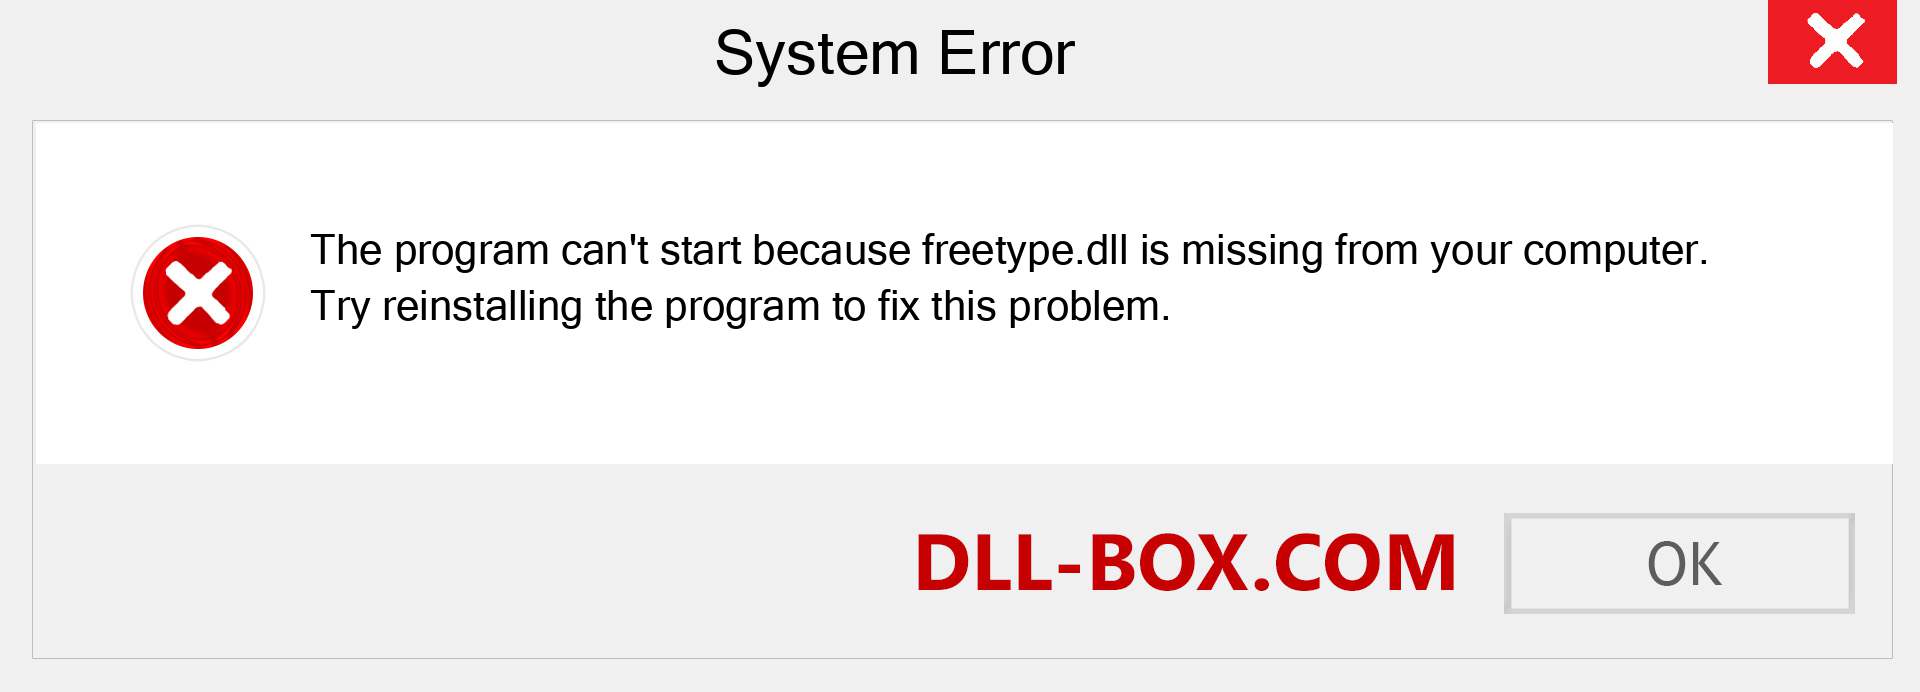  freetype.dll file is missing?. Download for Windows 7, 8, 10 - Fix  freetype dll Missing Error on Windows, photos, images